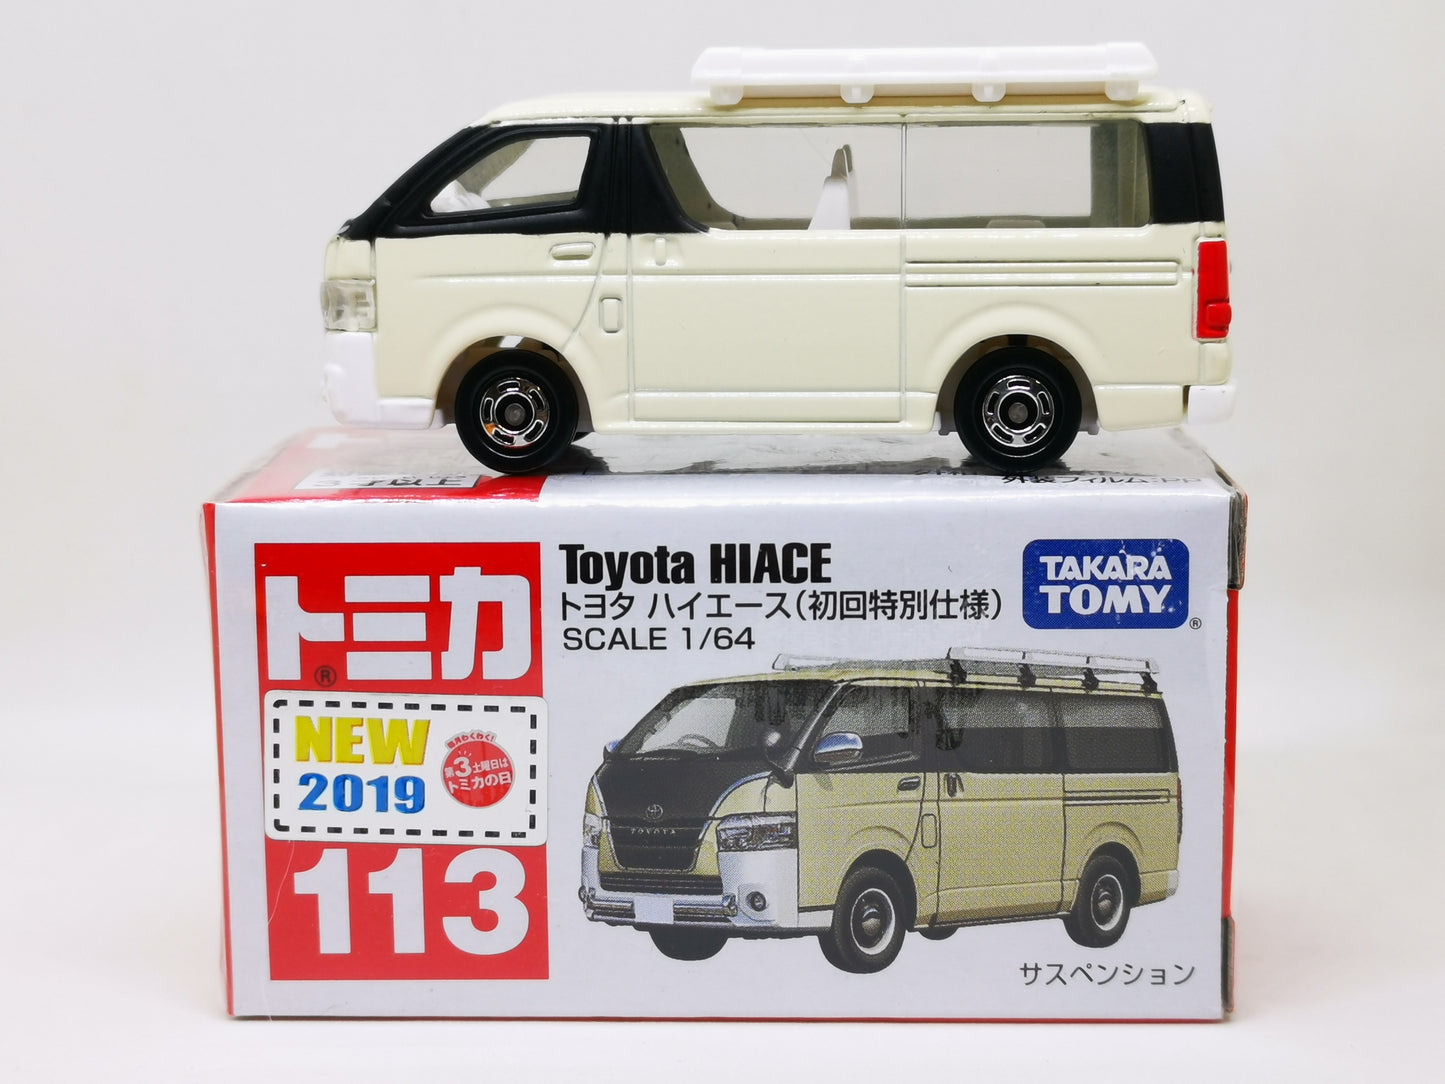 Tomica #113 Toyota Hiace 1st edition